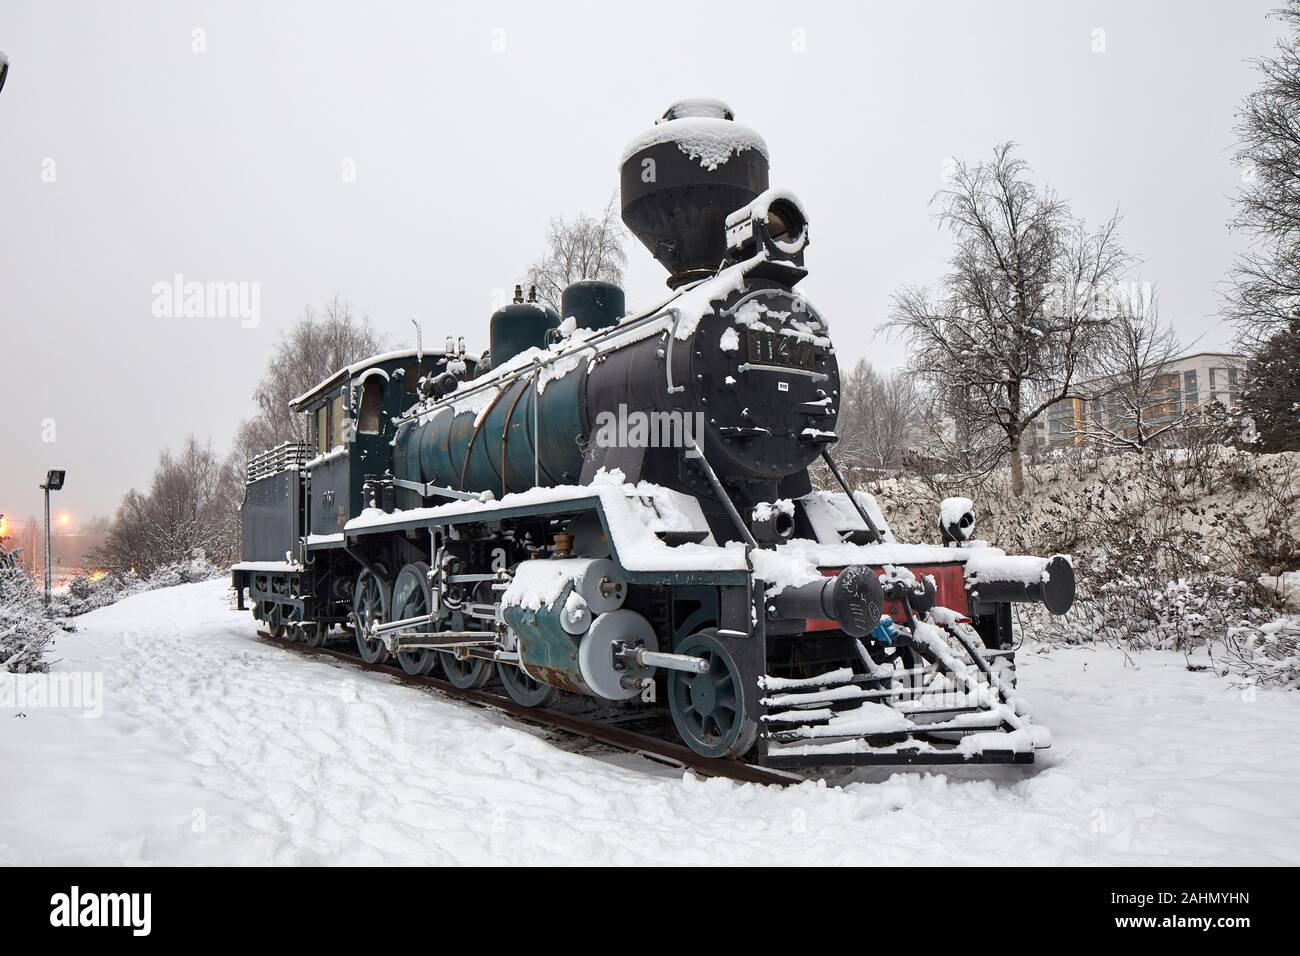 Finnish Rovaniemi a city in Finland and the region of Lapland  Static display Steam Locomotive VR Class Tk3 1147 at Rovaniemi railway station Stock Photo